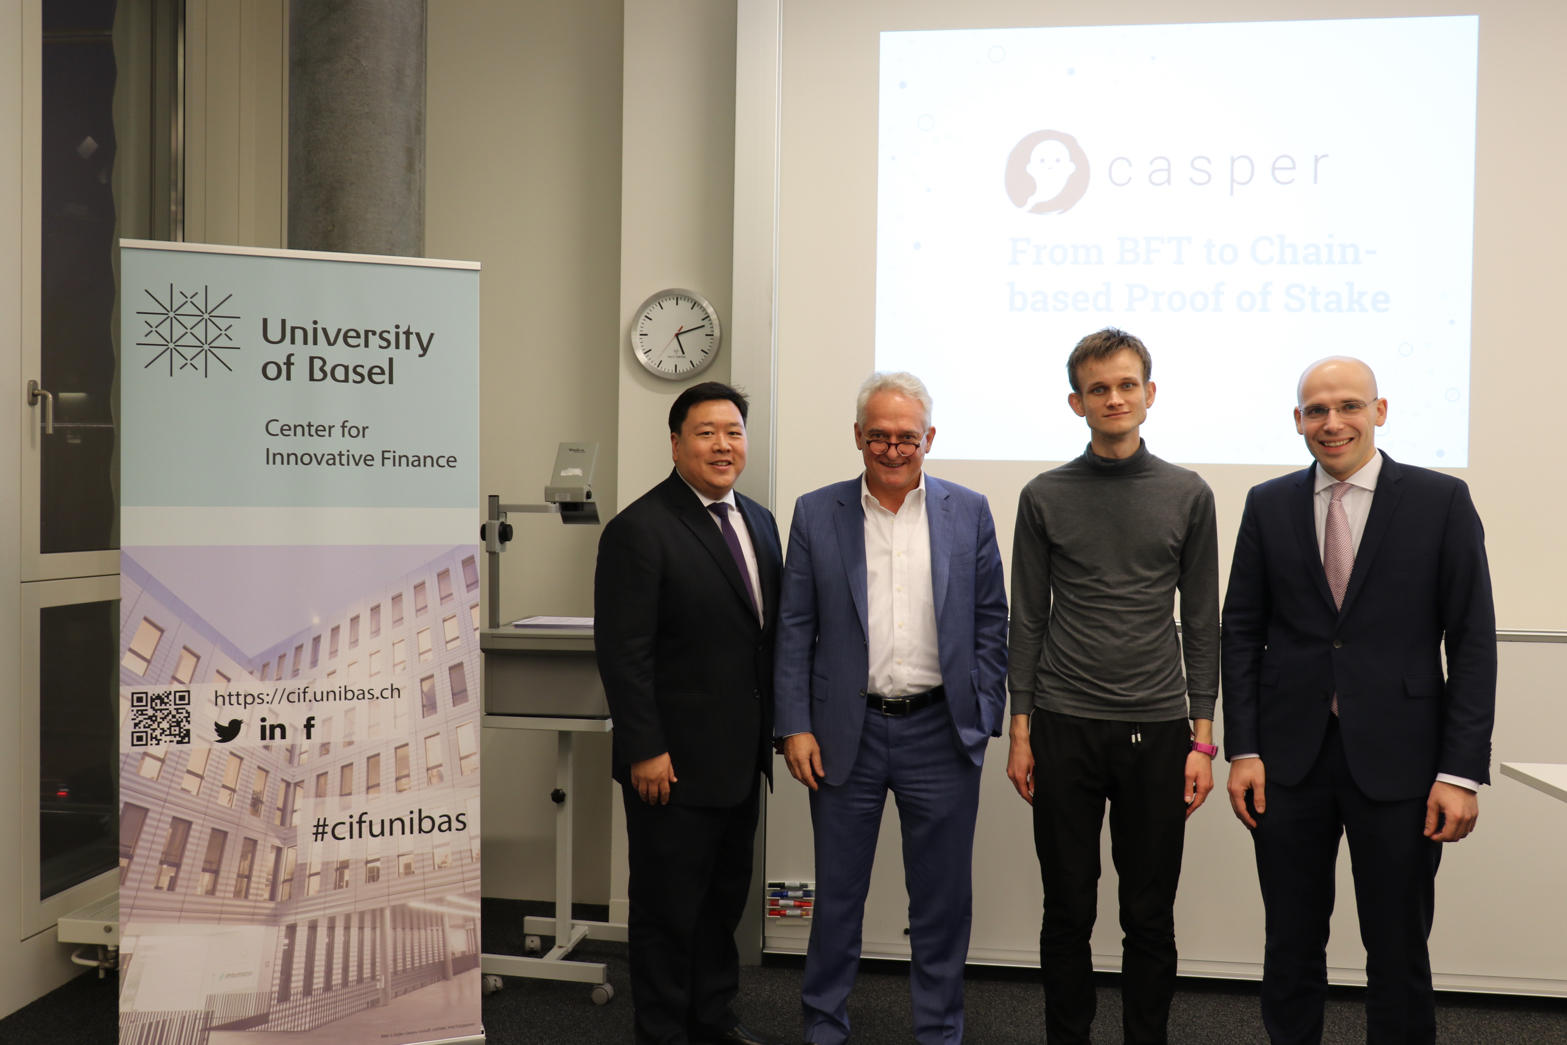 Switzerland's oldest university, the University of Basel, has awarded an honorary doctorate to Ethereum co-founder Vitalik Buterin.